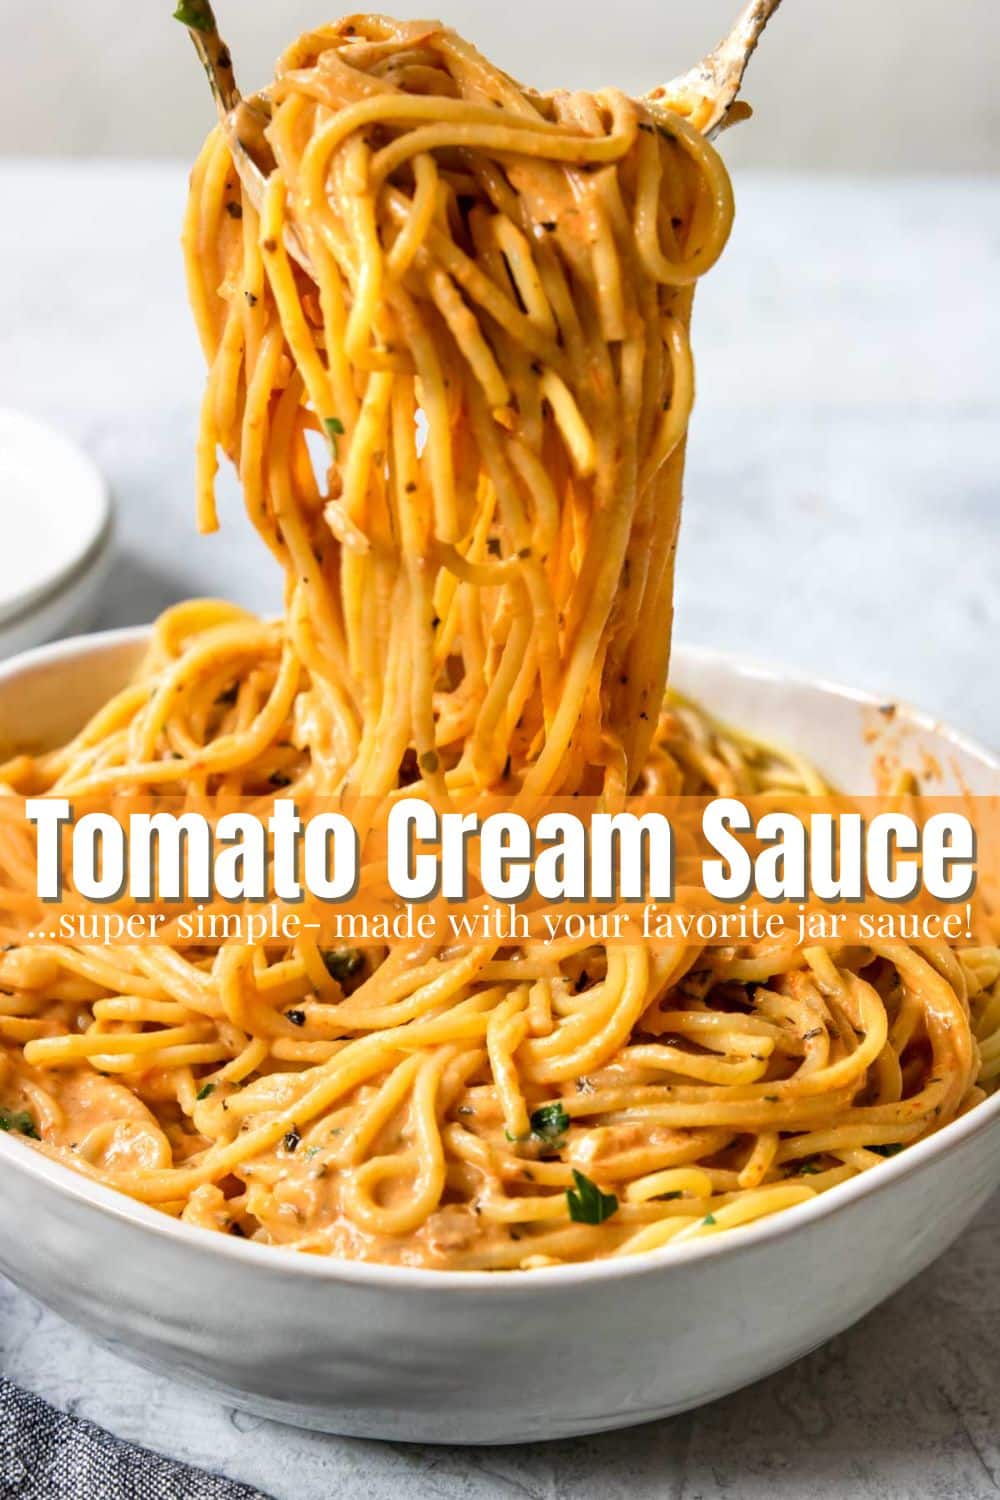 Spaghetti coated in a tomato cream sauce being served from a large bowl